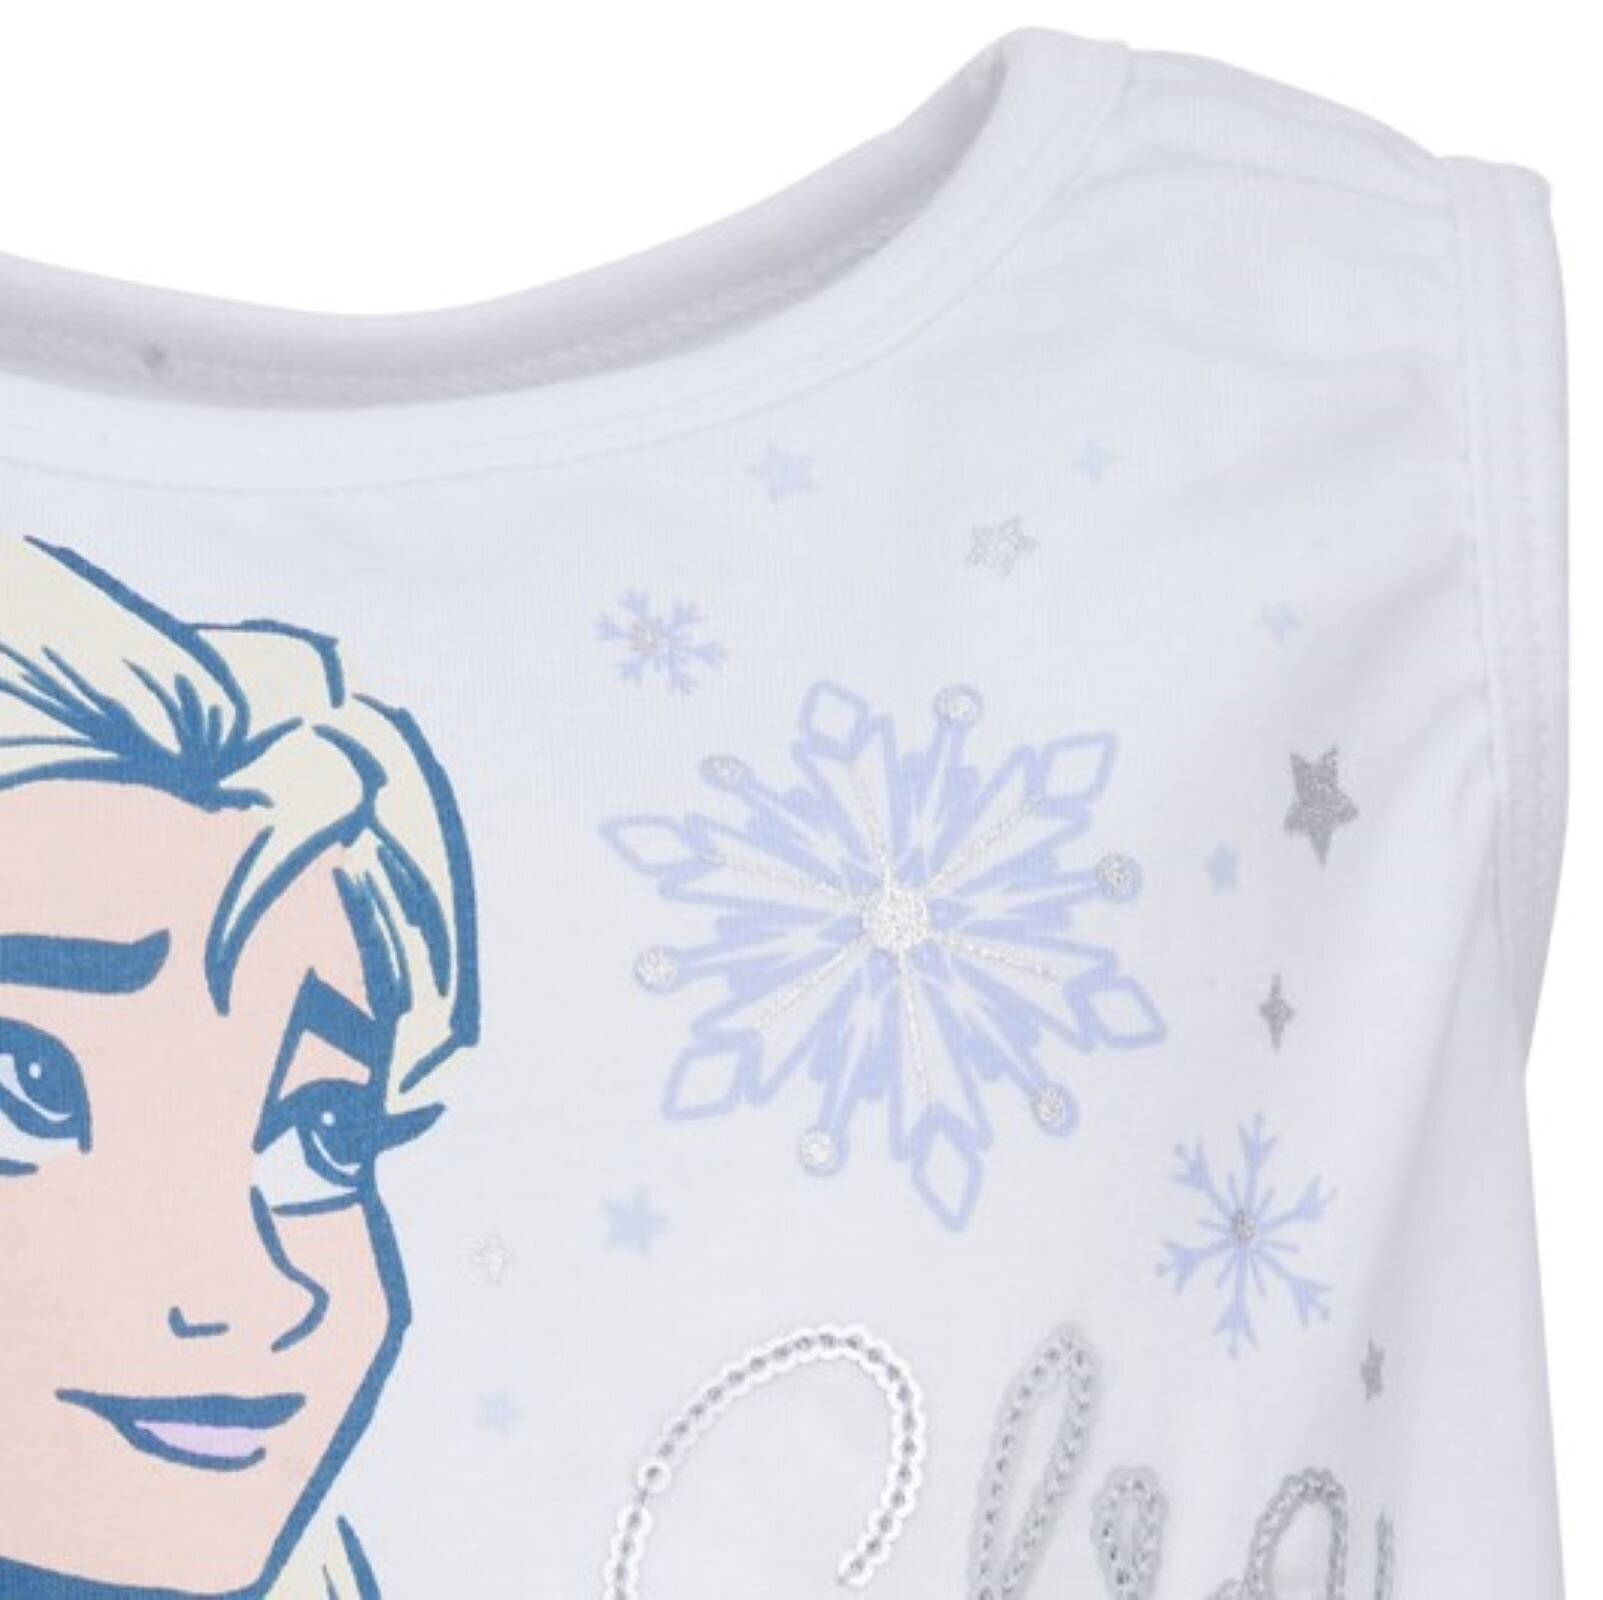 Disney Frozen Elsa Toddler Girls T-Shirt and French Terry Shorts Outfit Set White 2T - image 5 of 5